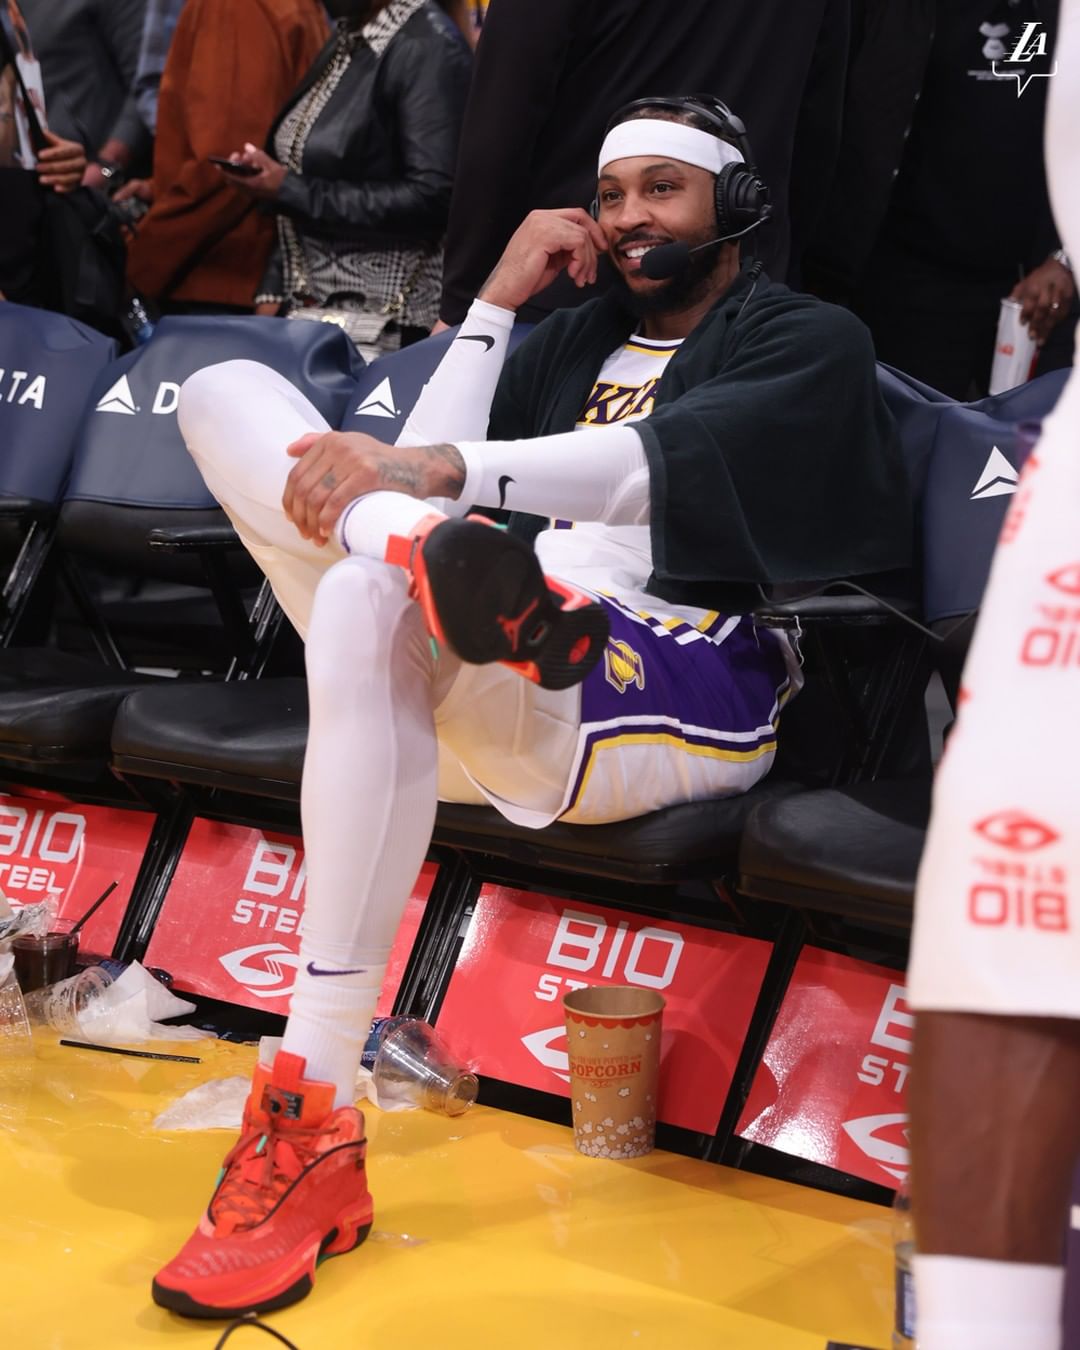 Melo Vibes #LakersWin...